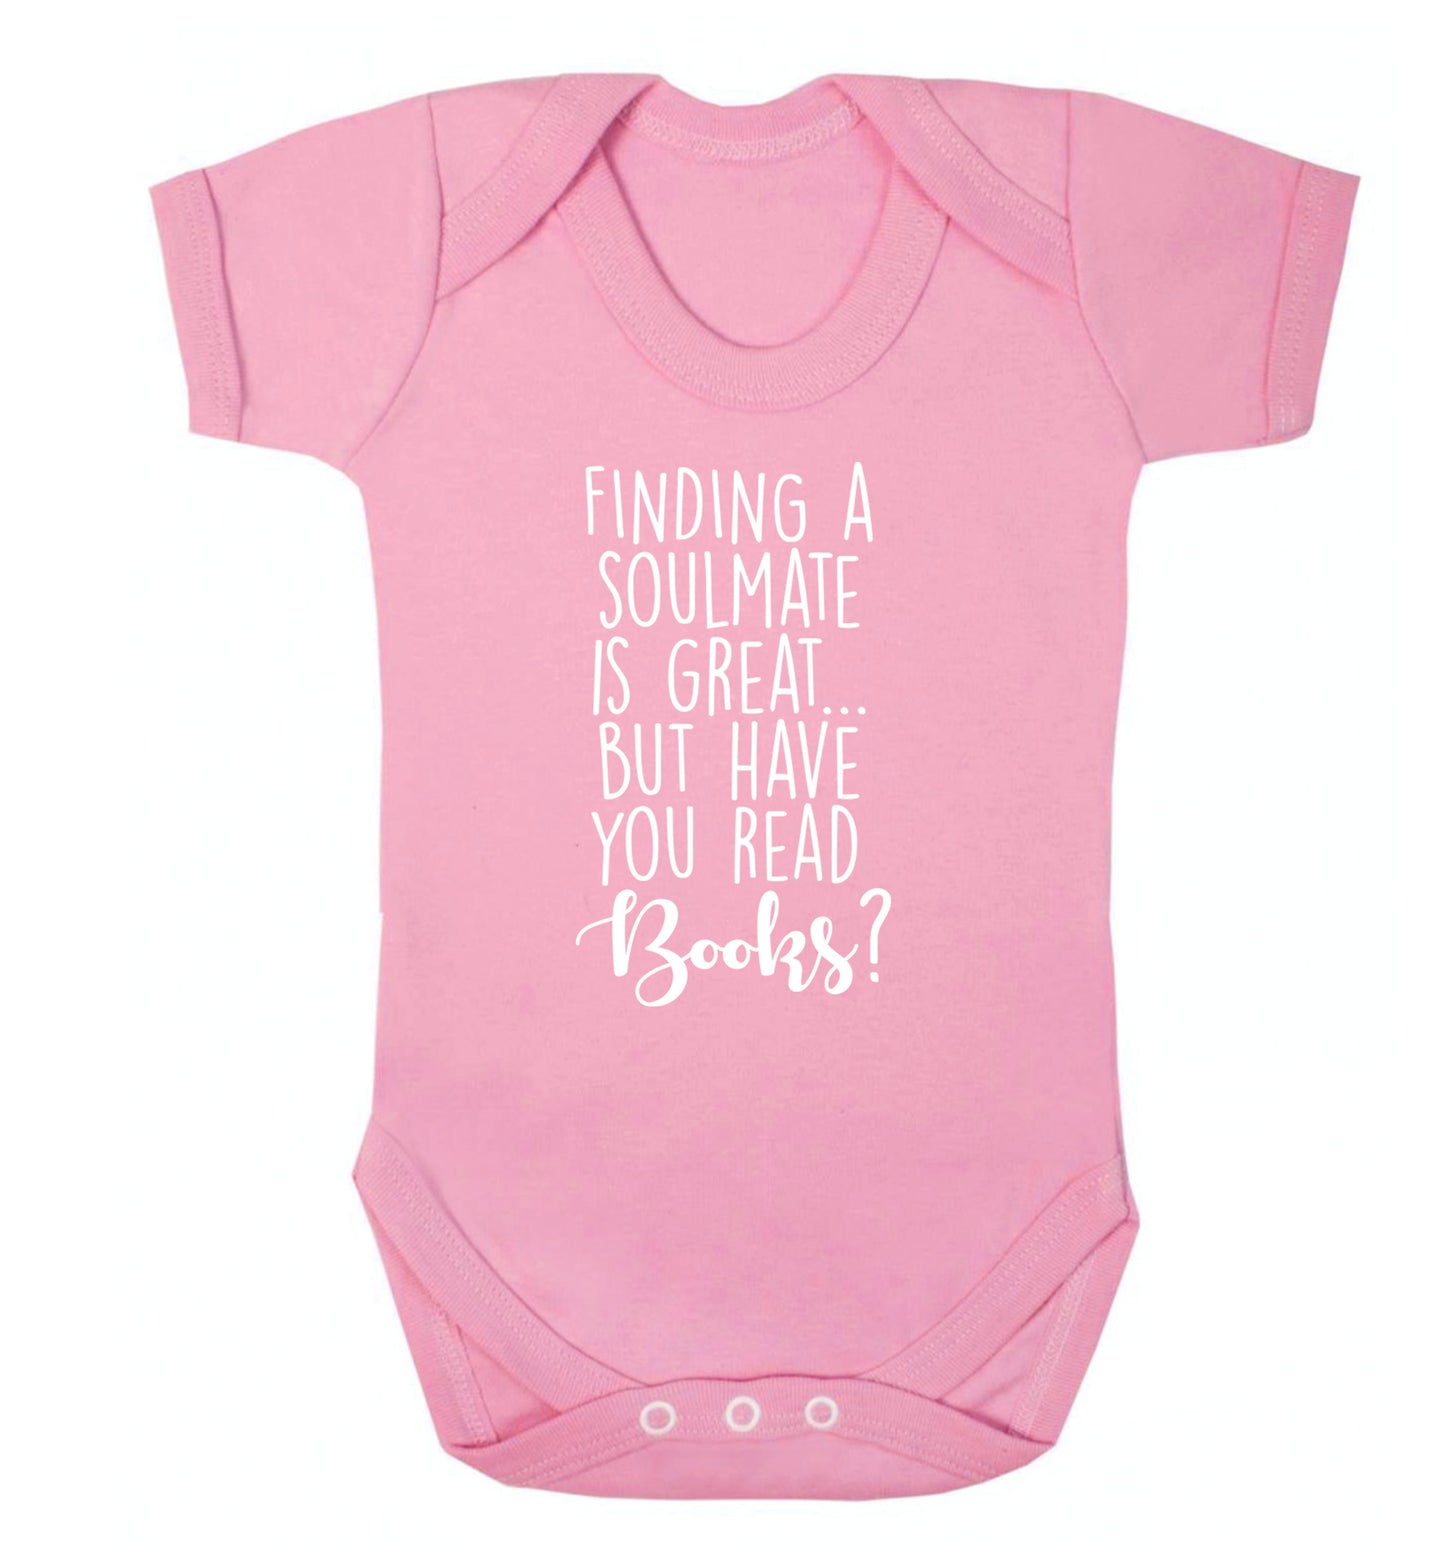 Finding a soulmate is great but have you read books? Baby Vest pale pink 18-24 months